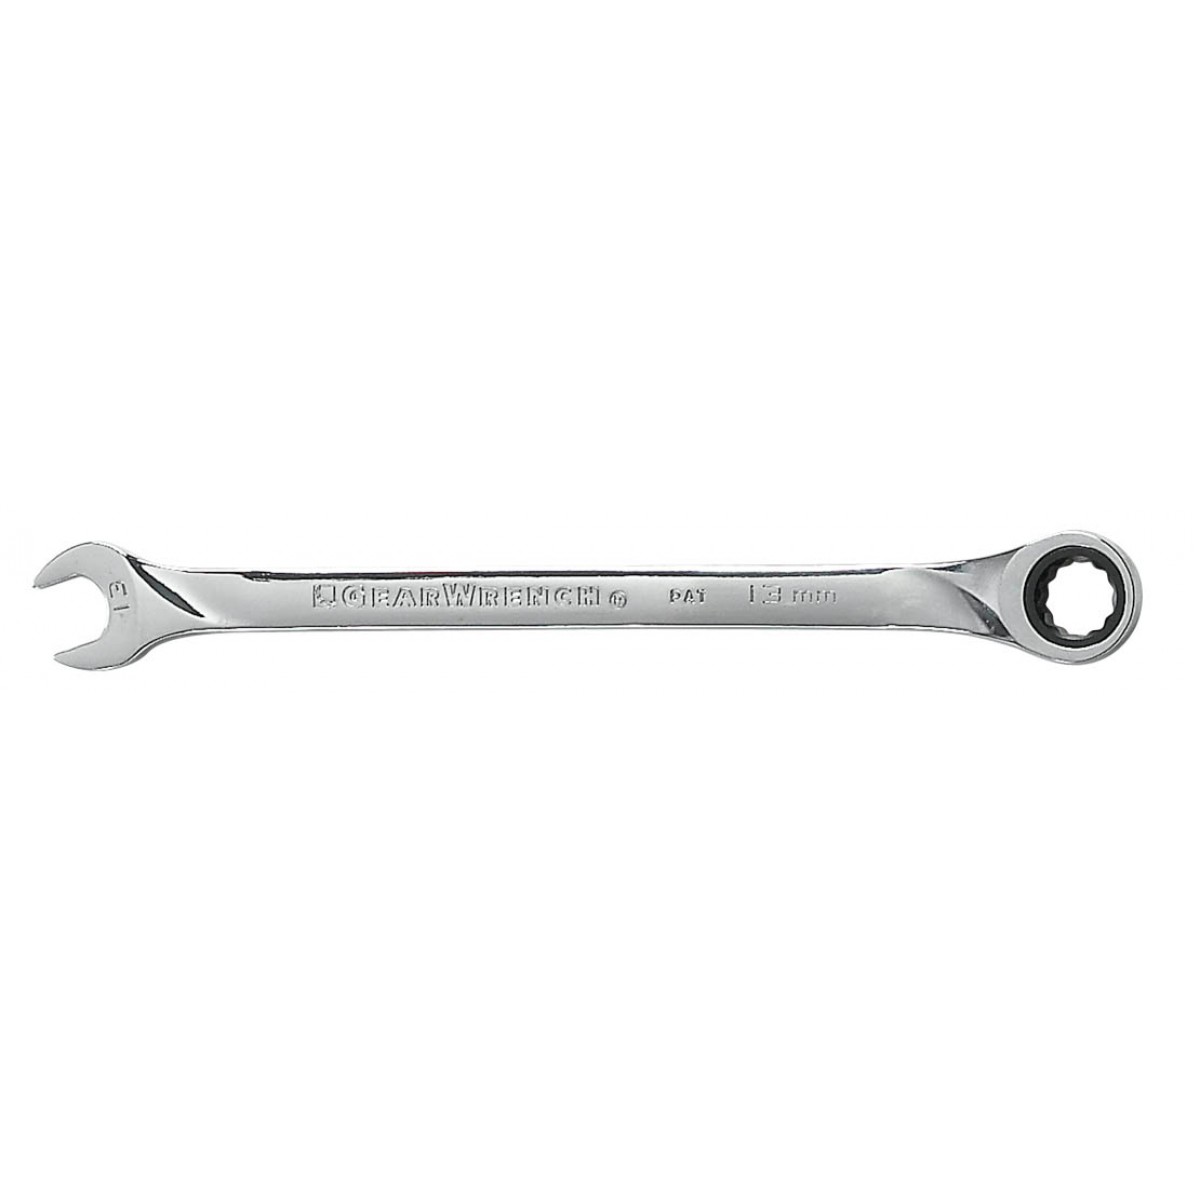 Apex Tool Group- Kd,kd Gear, Cooper Hand Gwr85017 17mm X L Ratcheting Combination Wrench